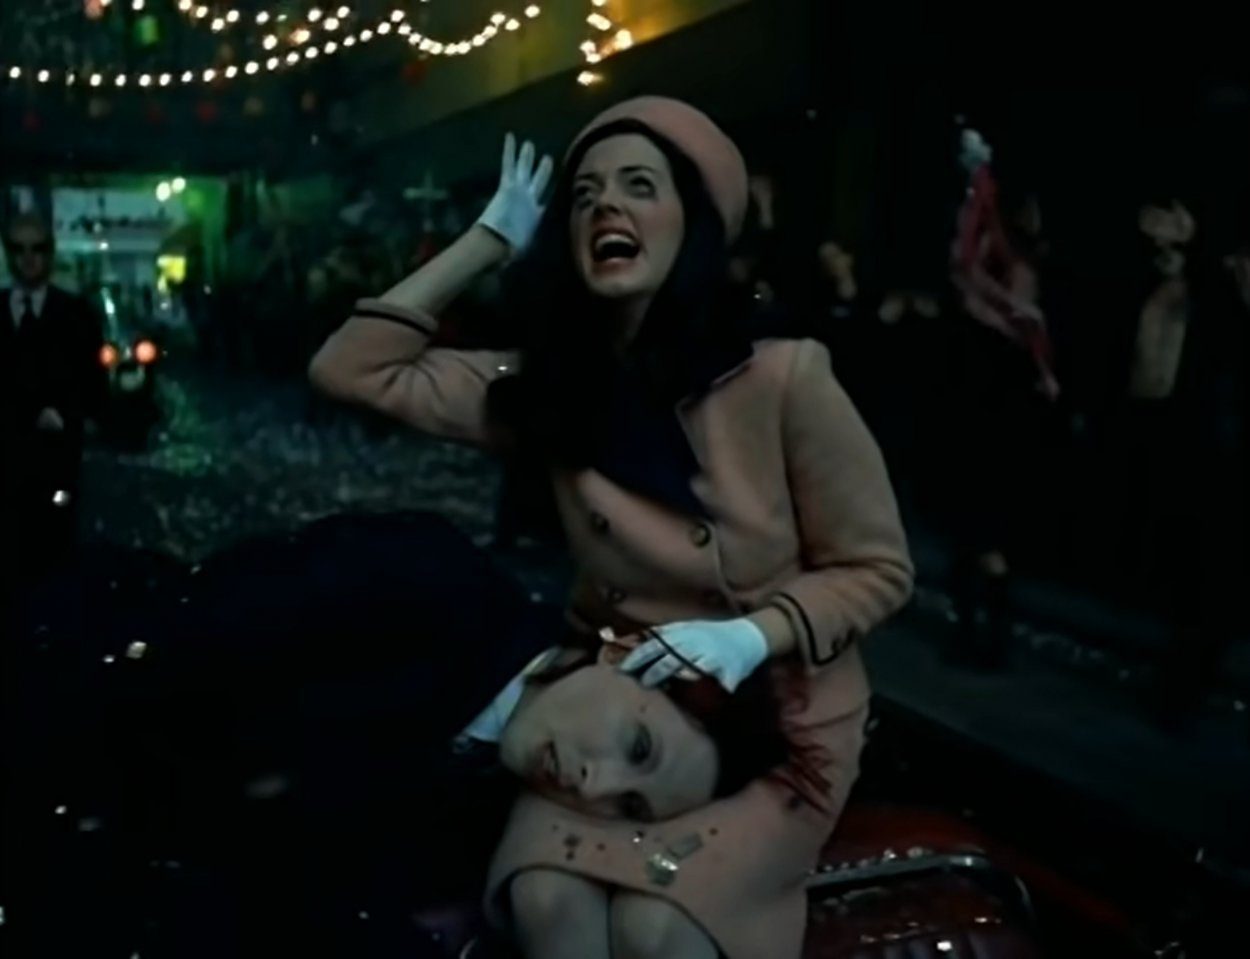 Marilyn Manson as JFK having just been shot, lying in the lap of Rose McGowan as a distraught Jacqueline Kennedy, in the "Coma White" music video